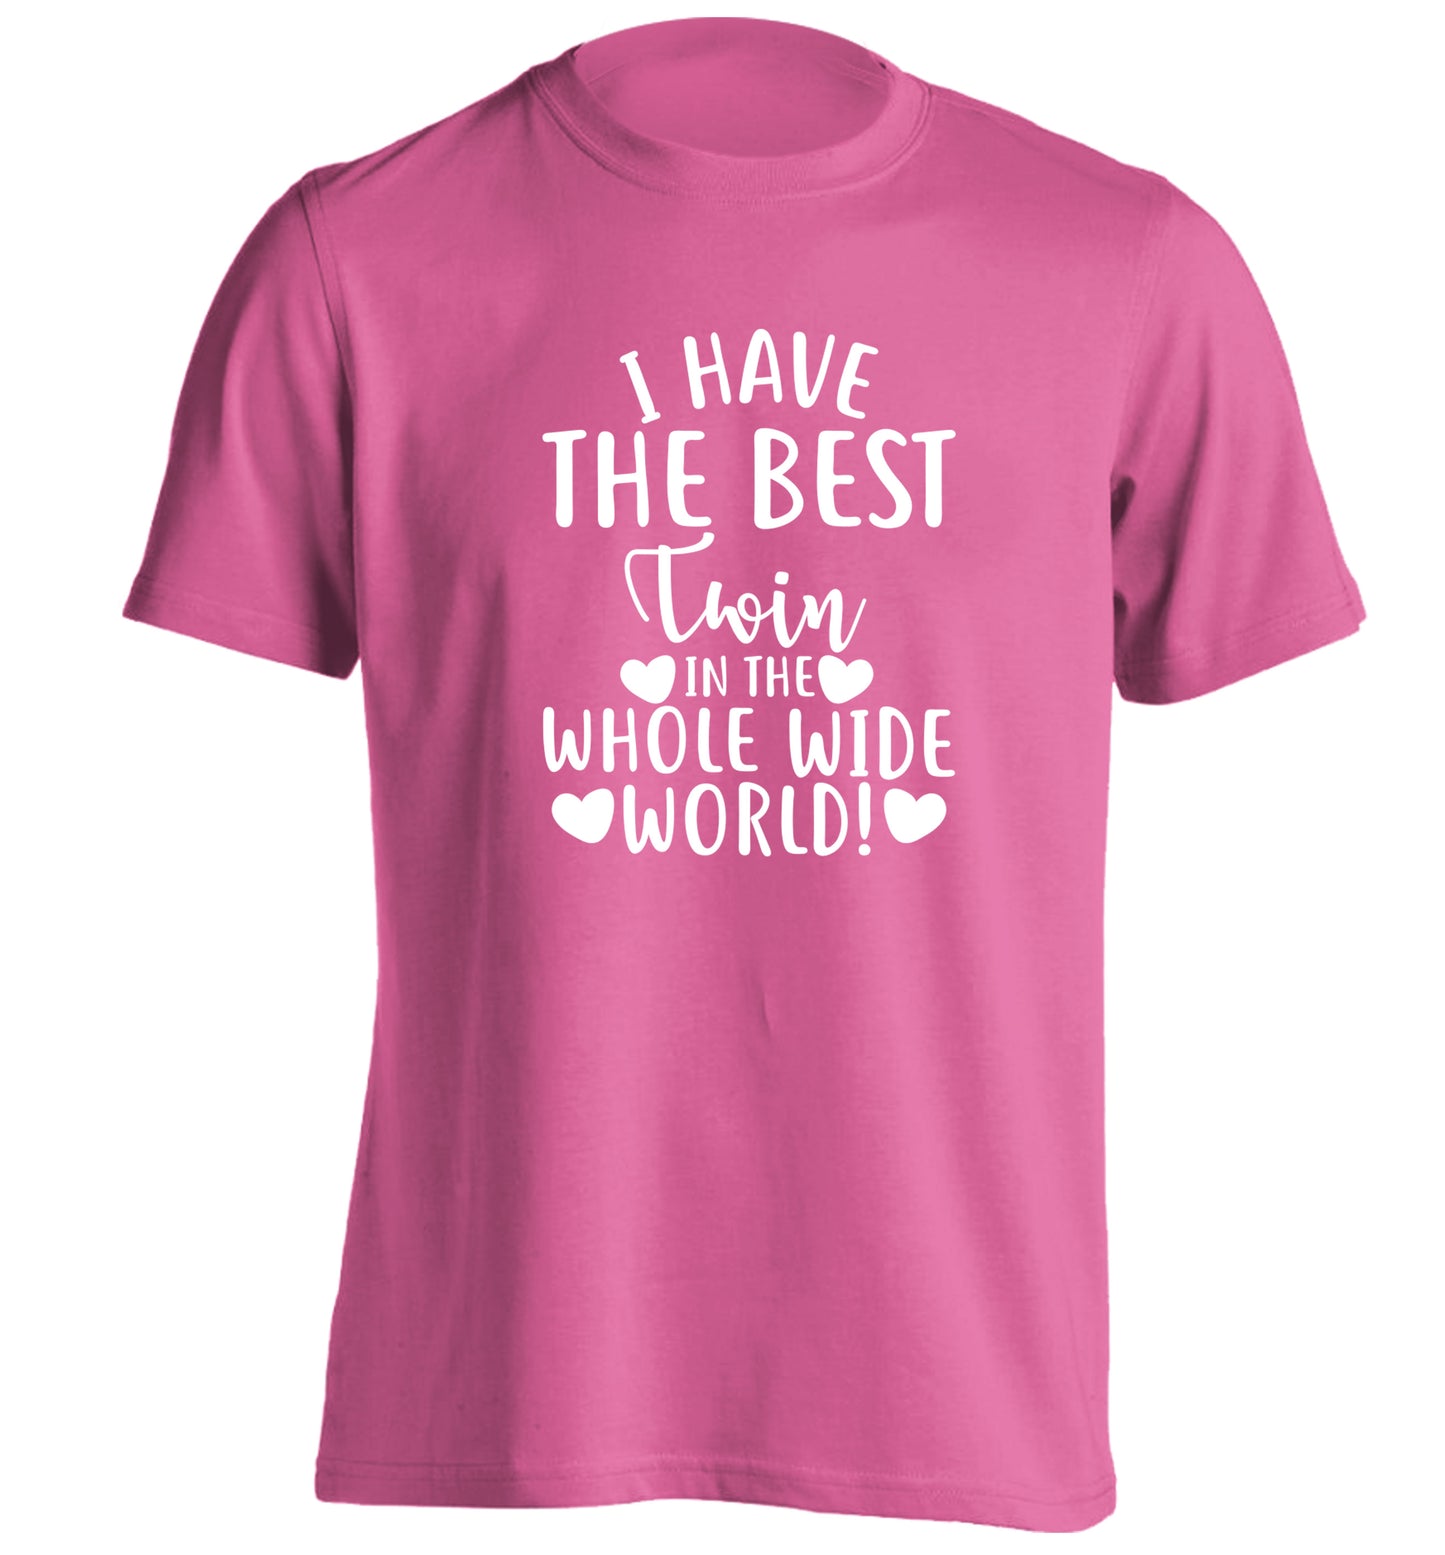 I have the best twin in the whole wide world! adults unisex pink Tshirt 2XL